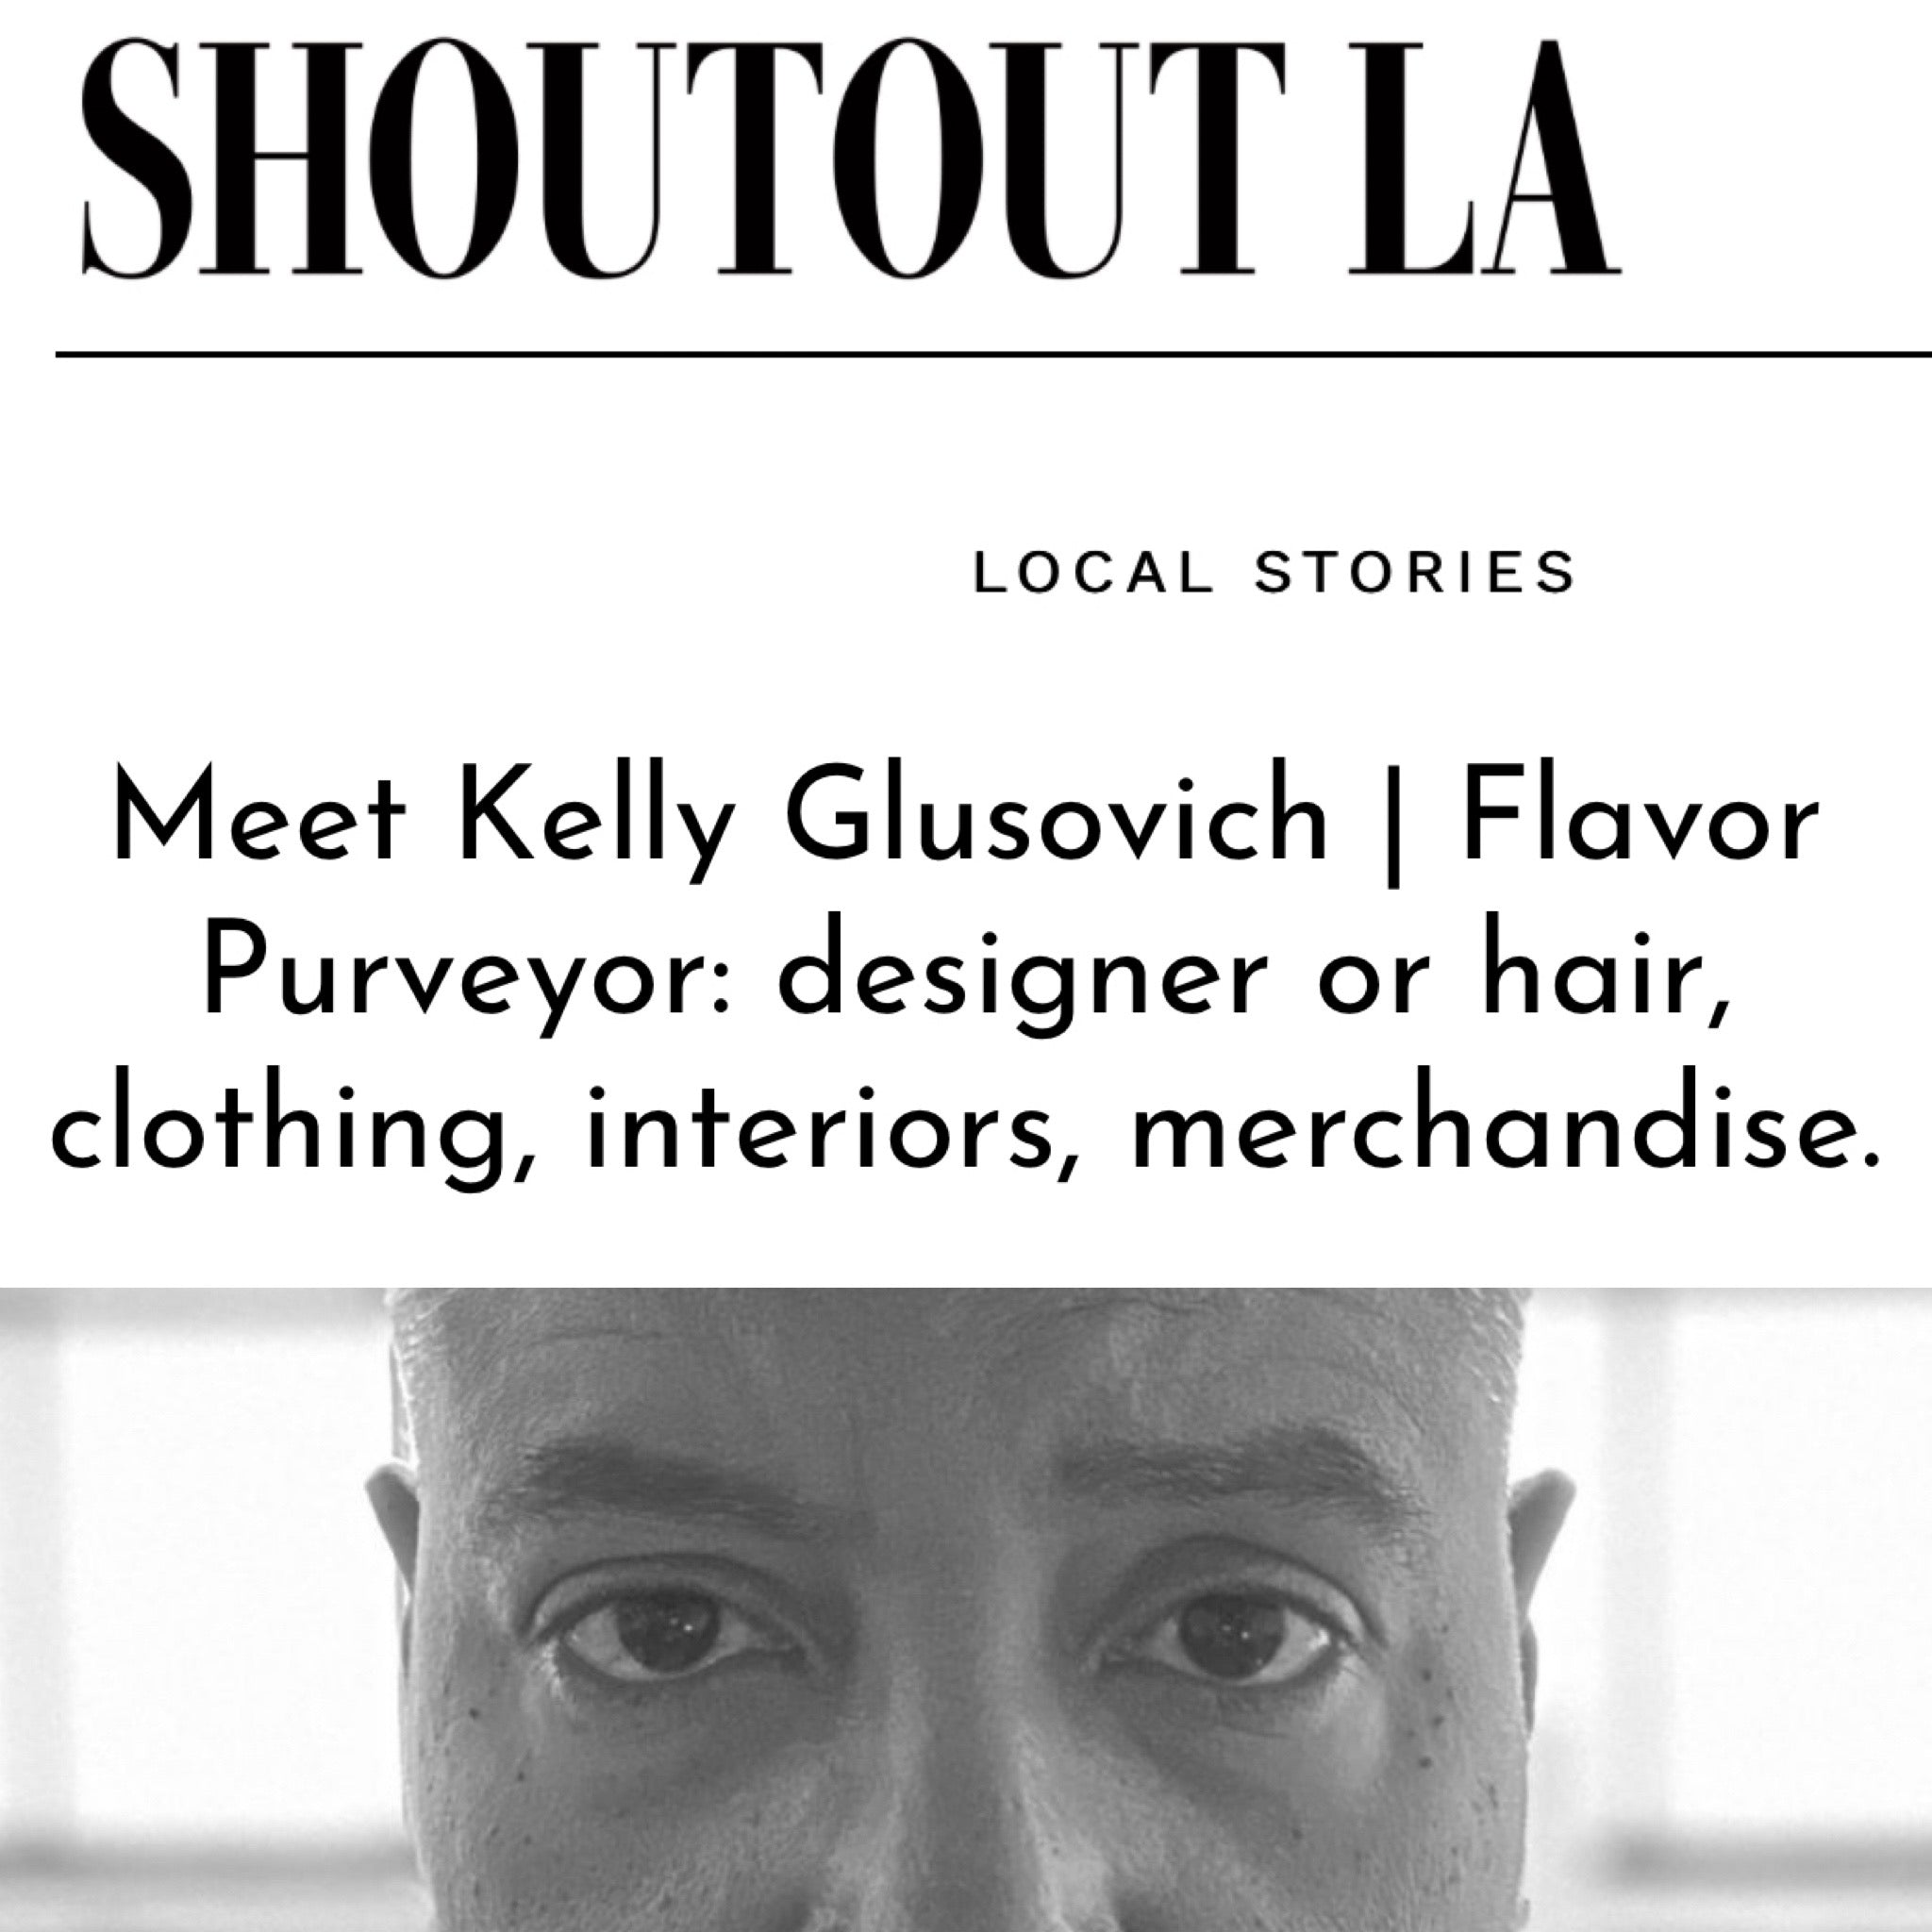 Check this article out from ShoutOutLA